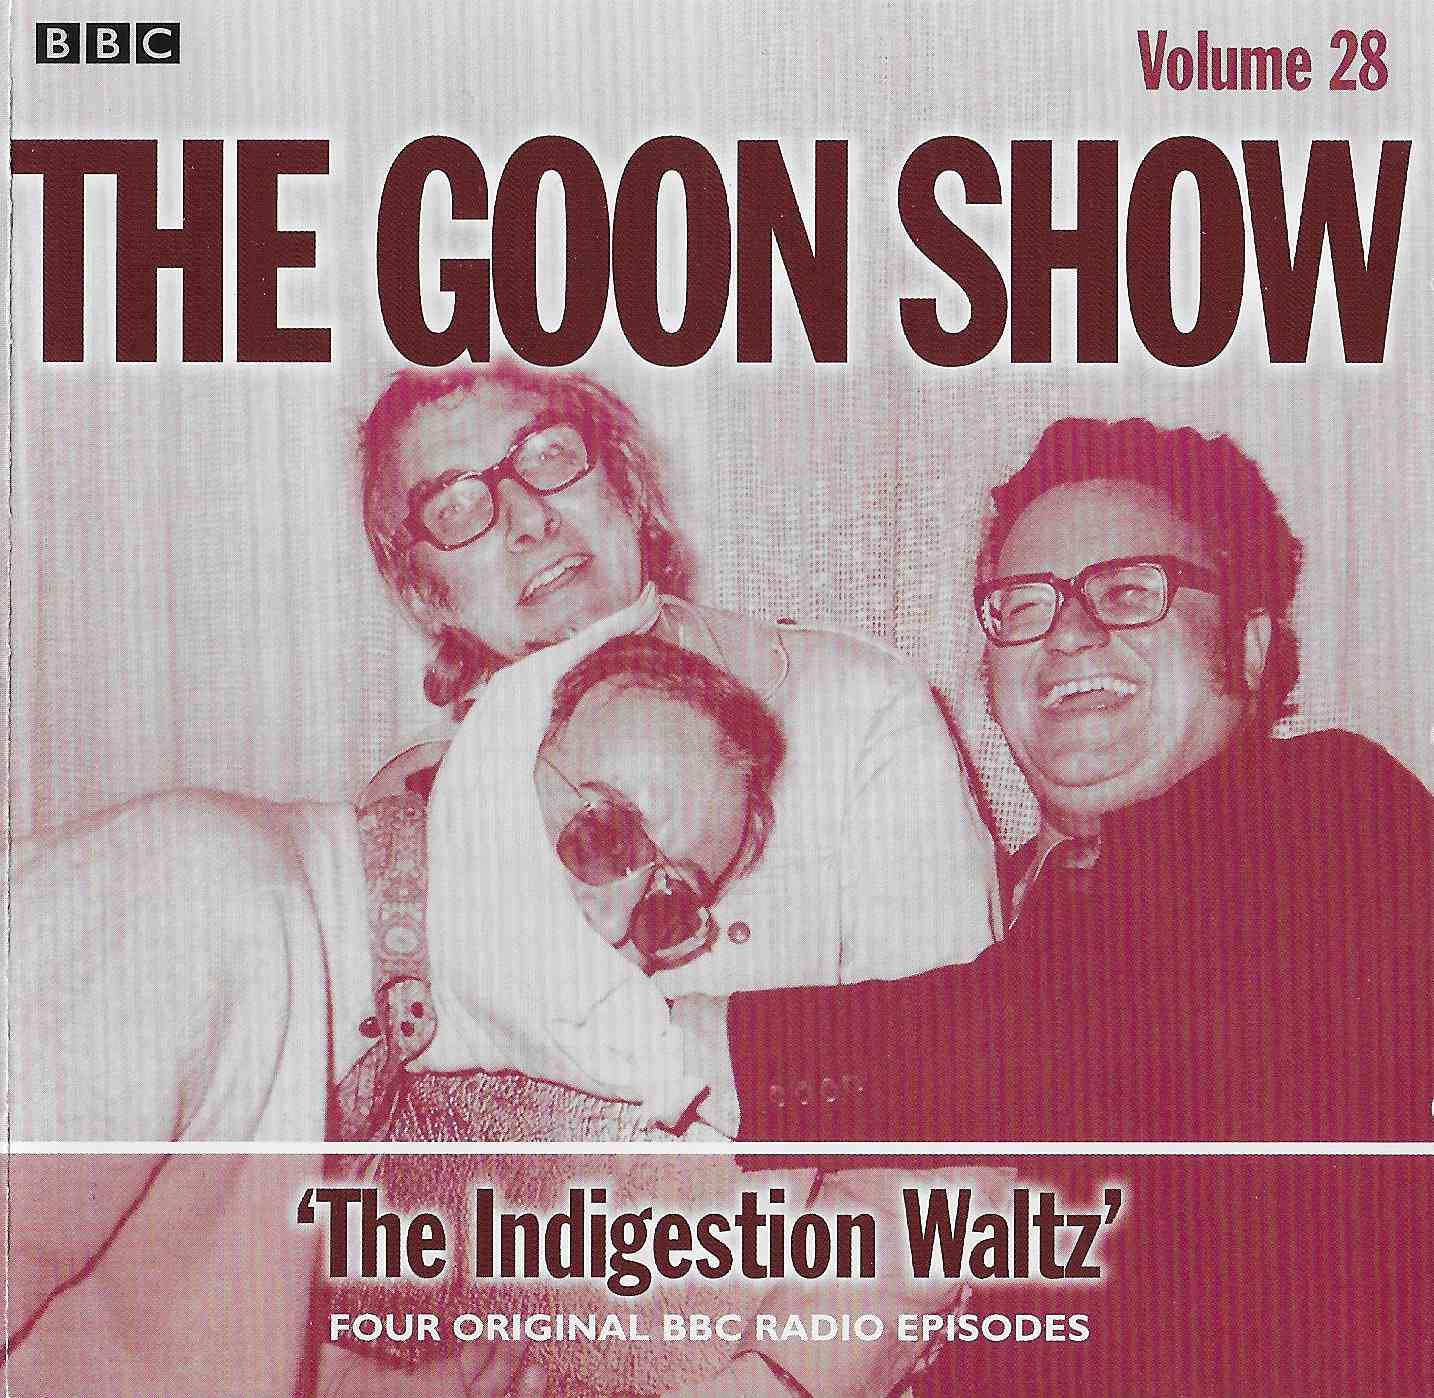 Picture of ISBN 978-1-4084-6855-5 The Goon Show 28 - The indigestion waltz by artist Spike Milligan / Larry Stephens